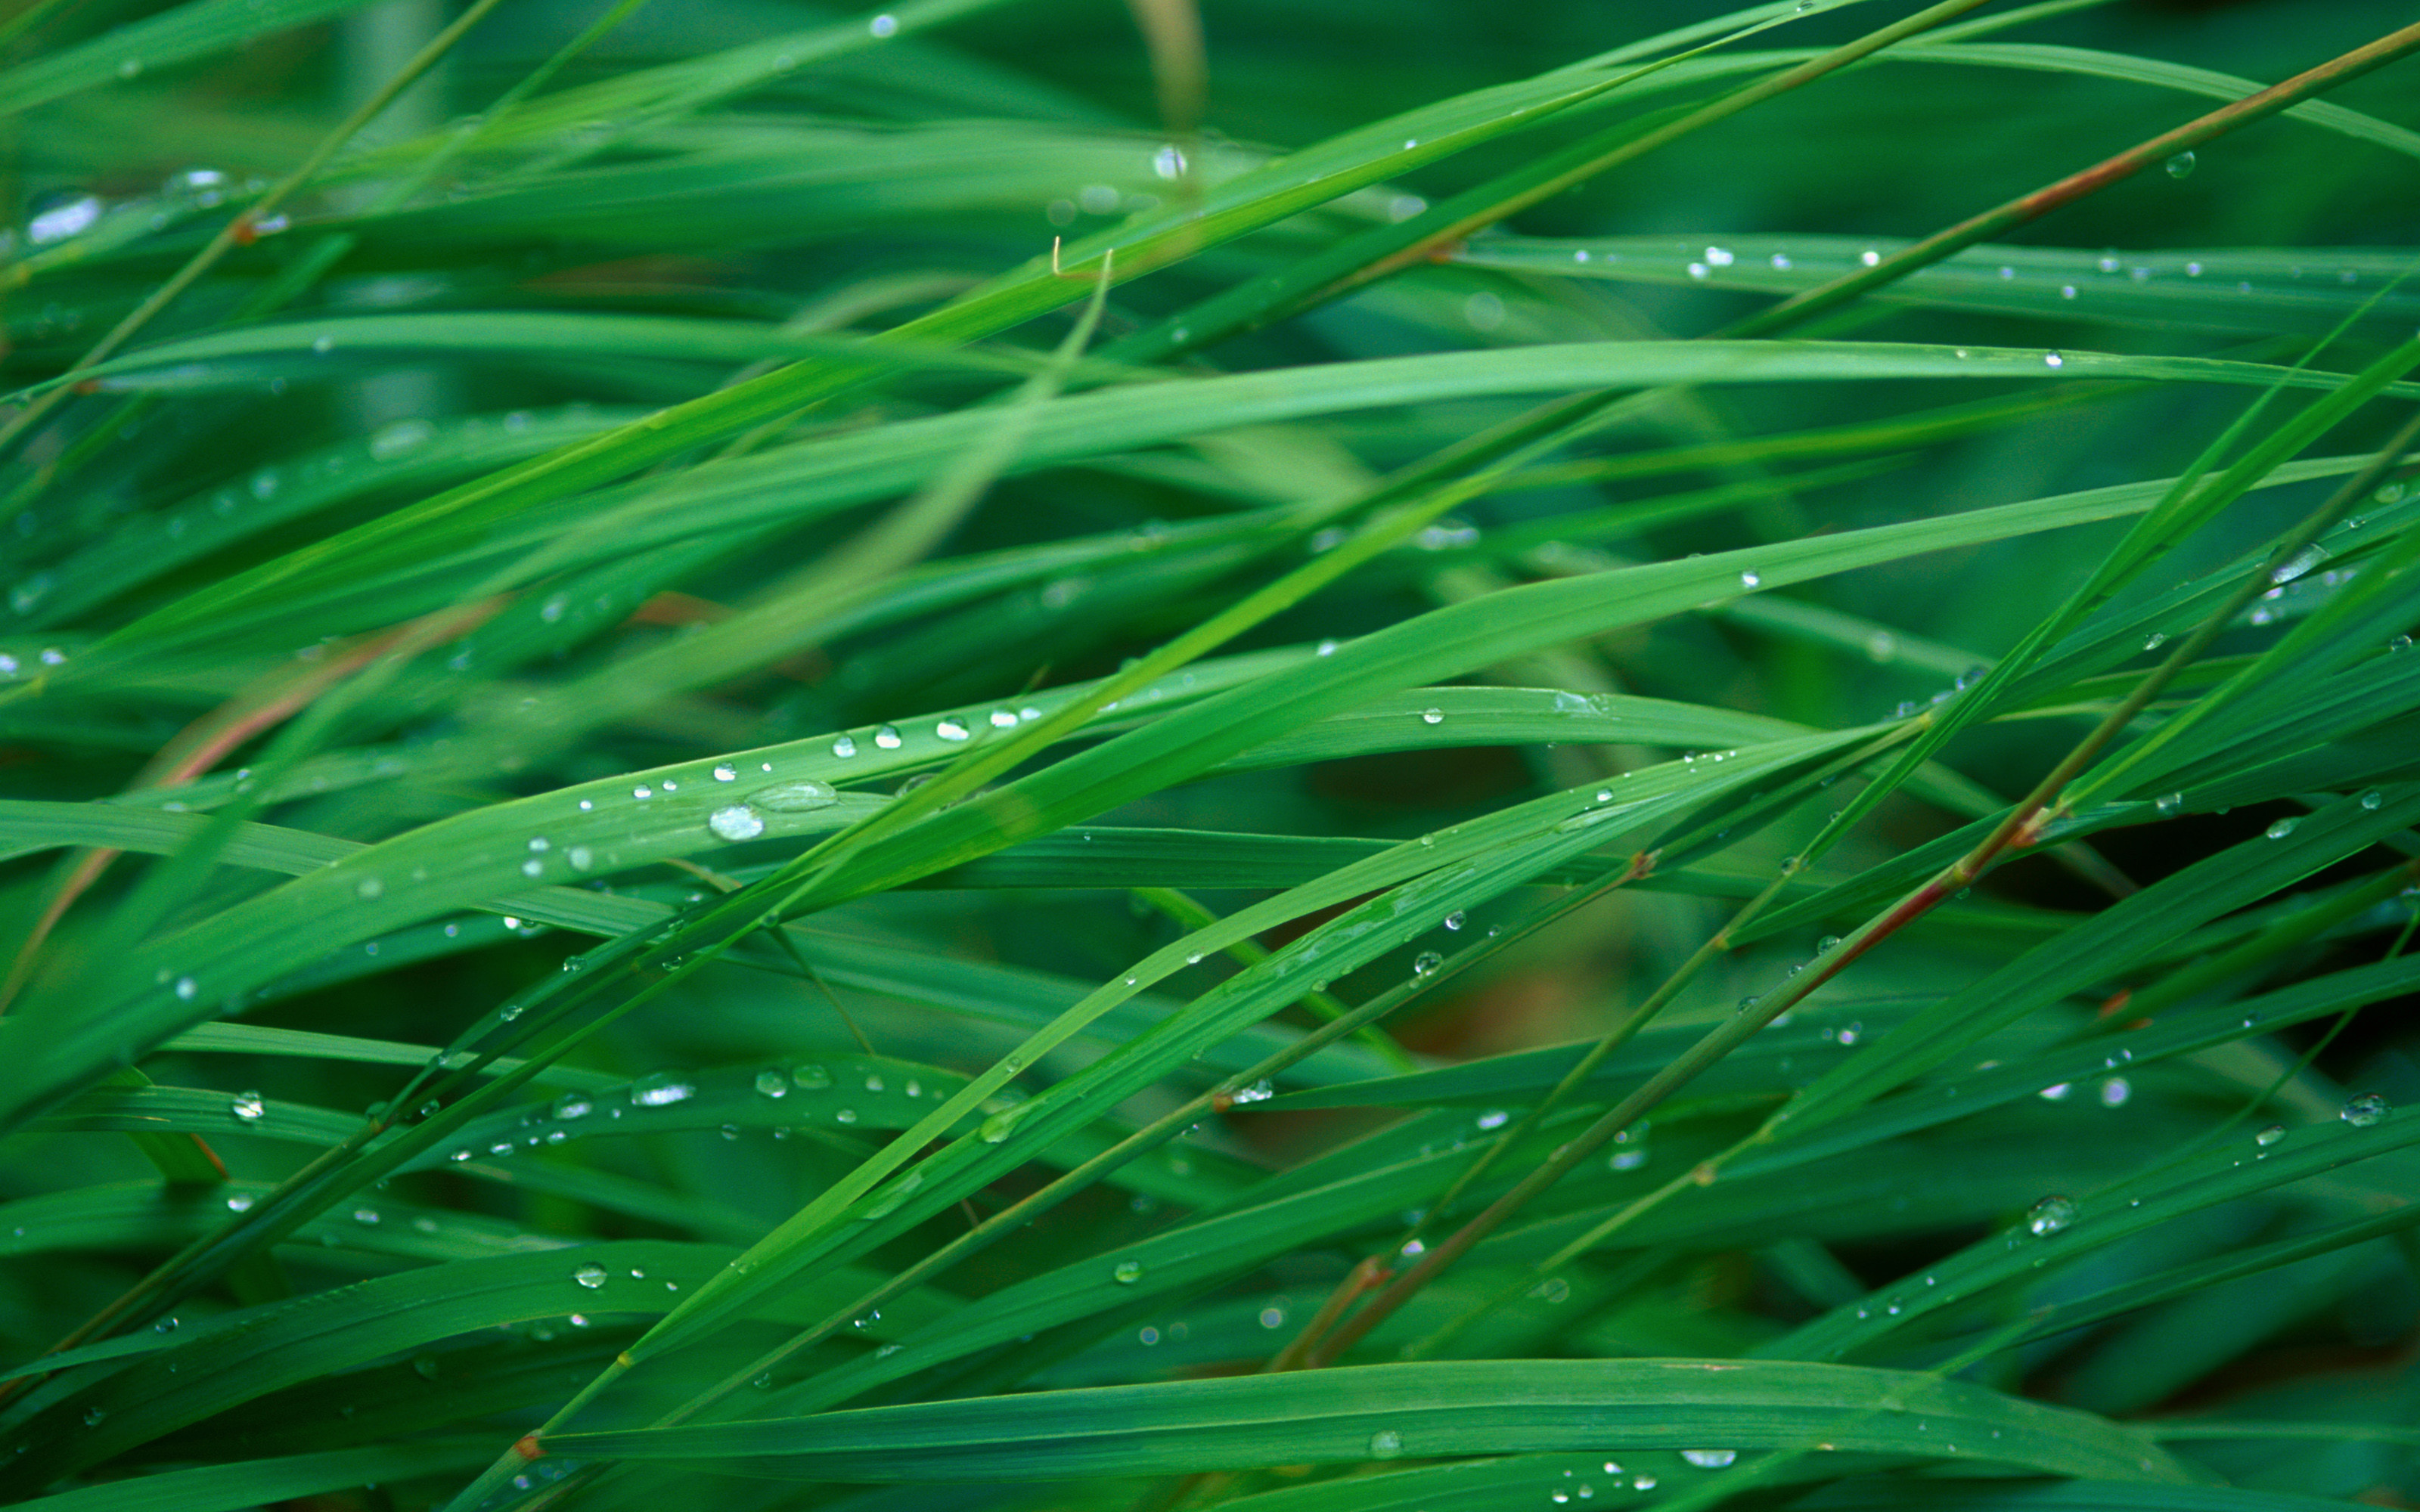 Apple Grass Wallpaper (72+ pictures)